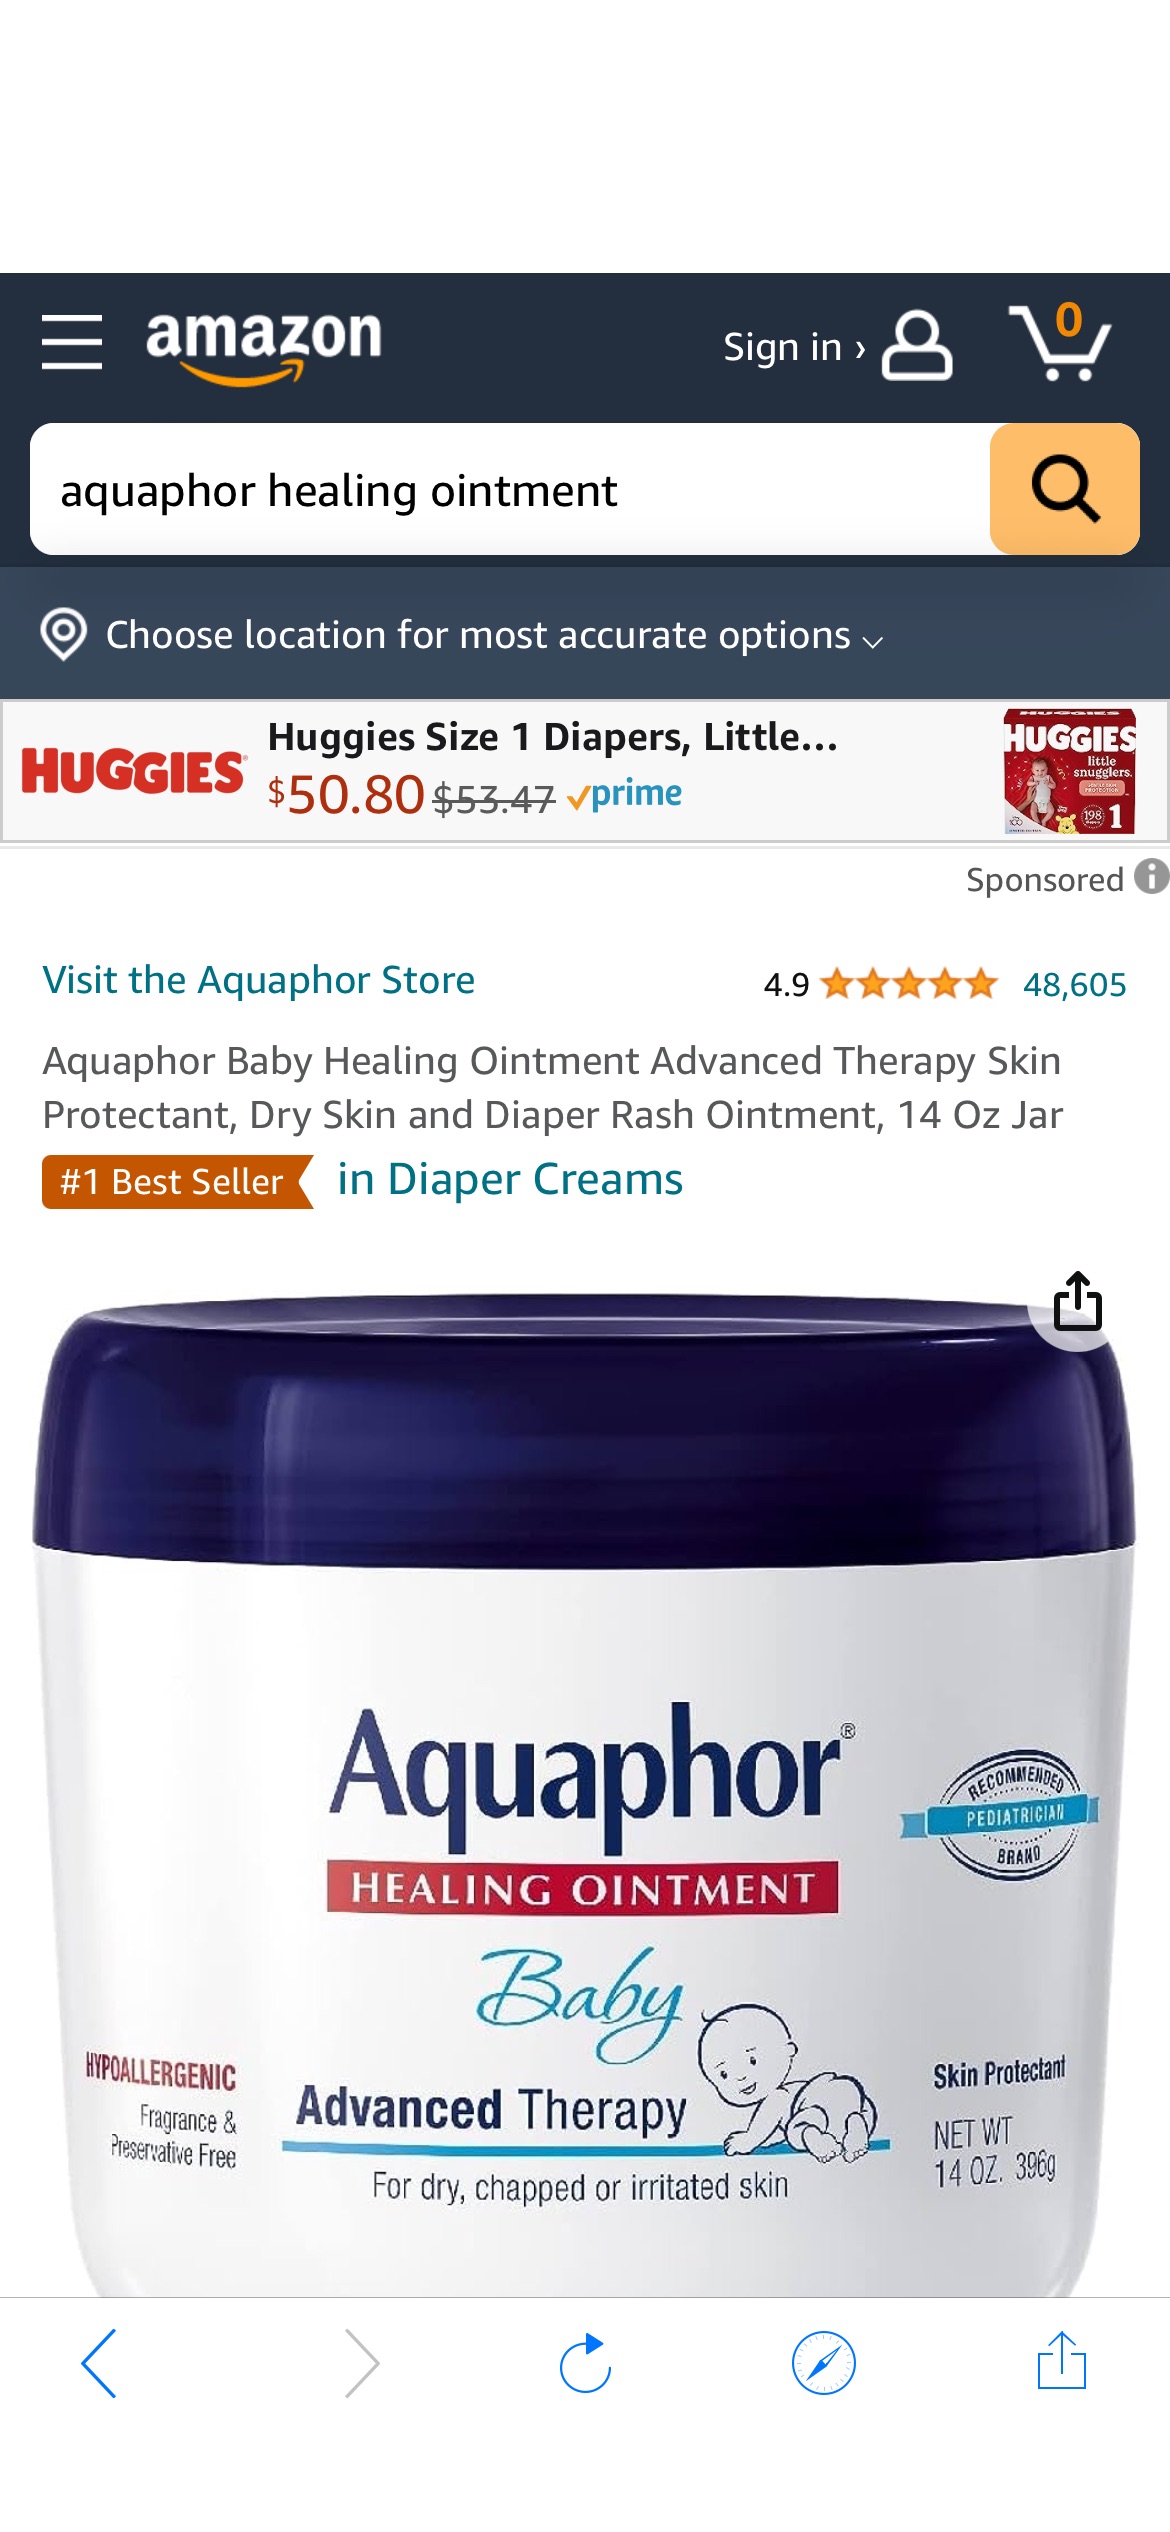 Amazon.com: Aquaphor Baby Healing Ointment Advanced Therapy Skin Protectant, Dry Skin and Diaper Rash Ointment, 14 Oz Jar : Baby